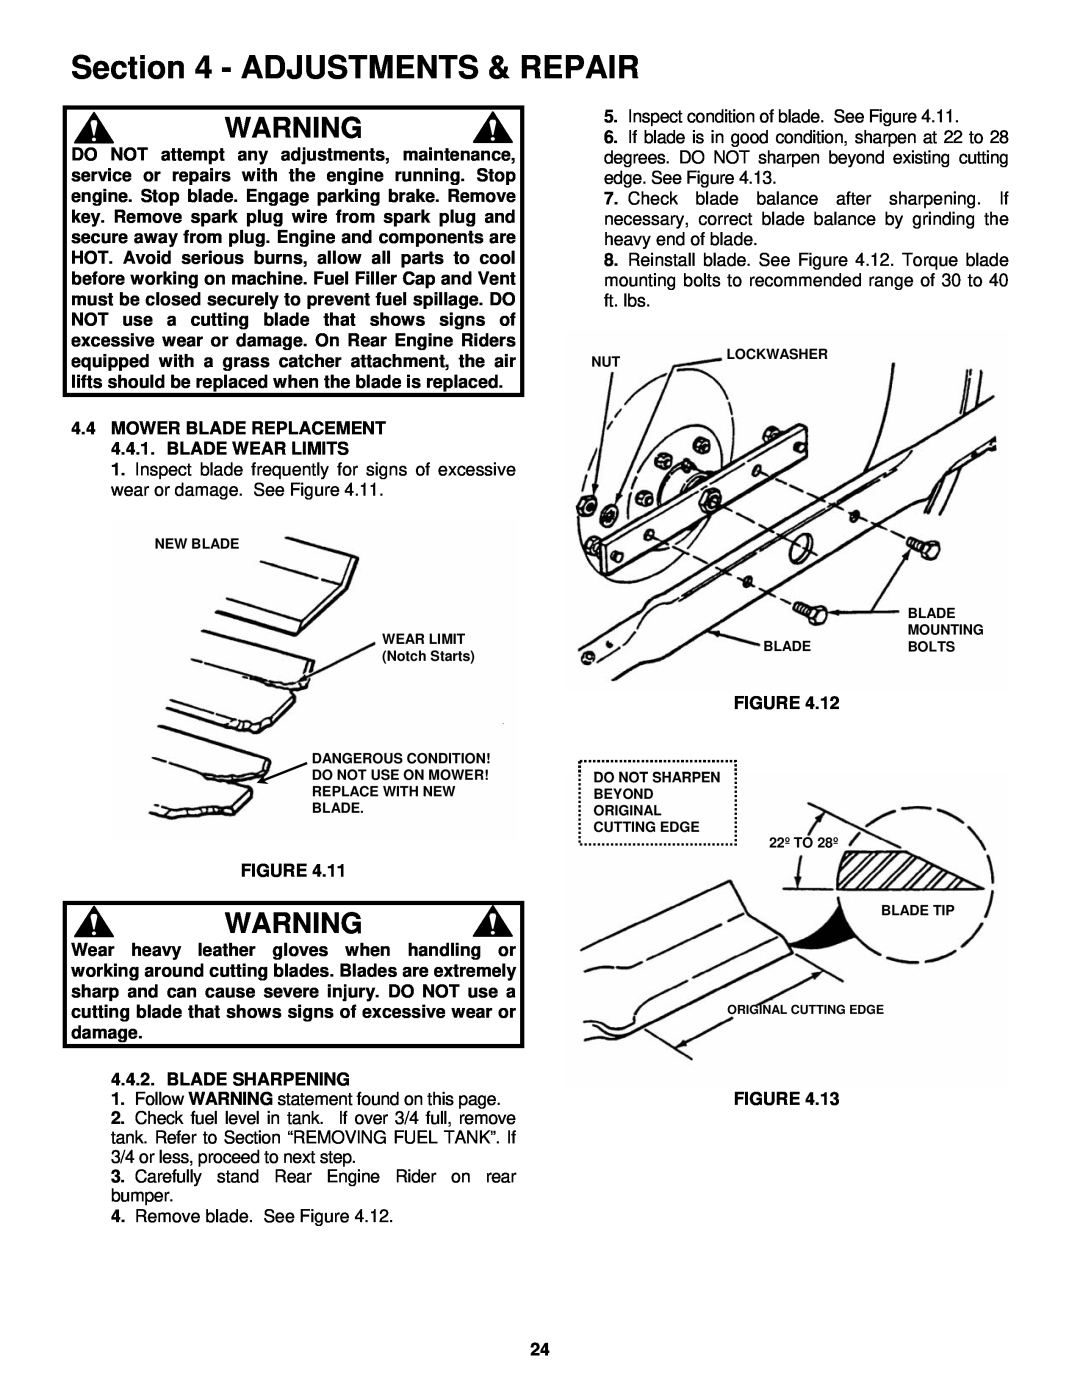 Snapper important safety instructions Adjustments & Repair, MOWER BLADE REPLACEMENT 4.4.1. BLADE WEAR LIMITS 